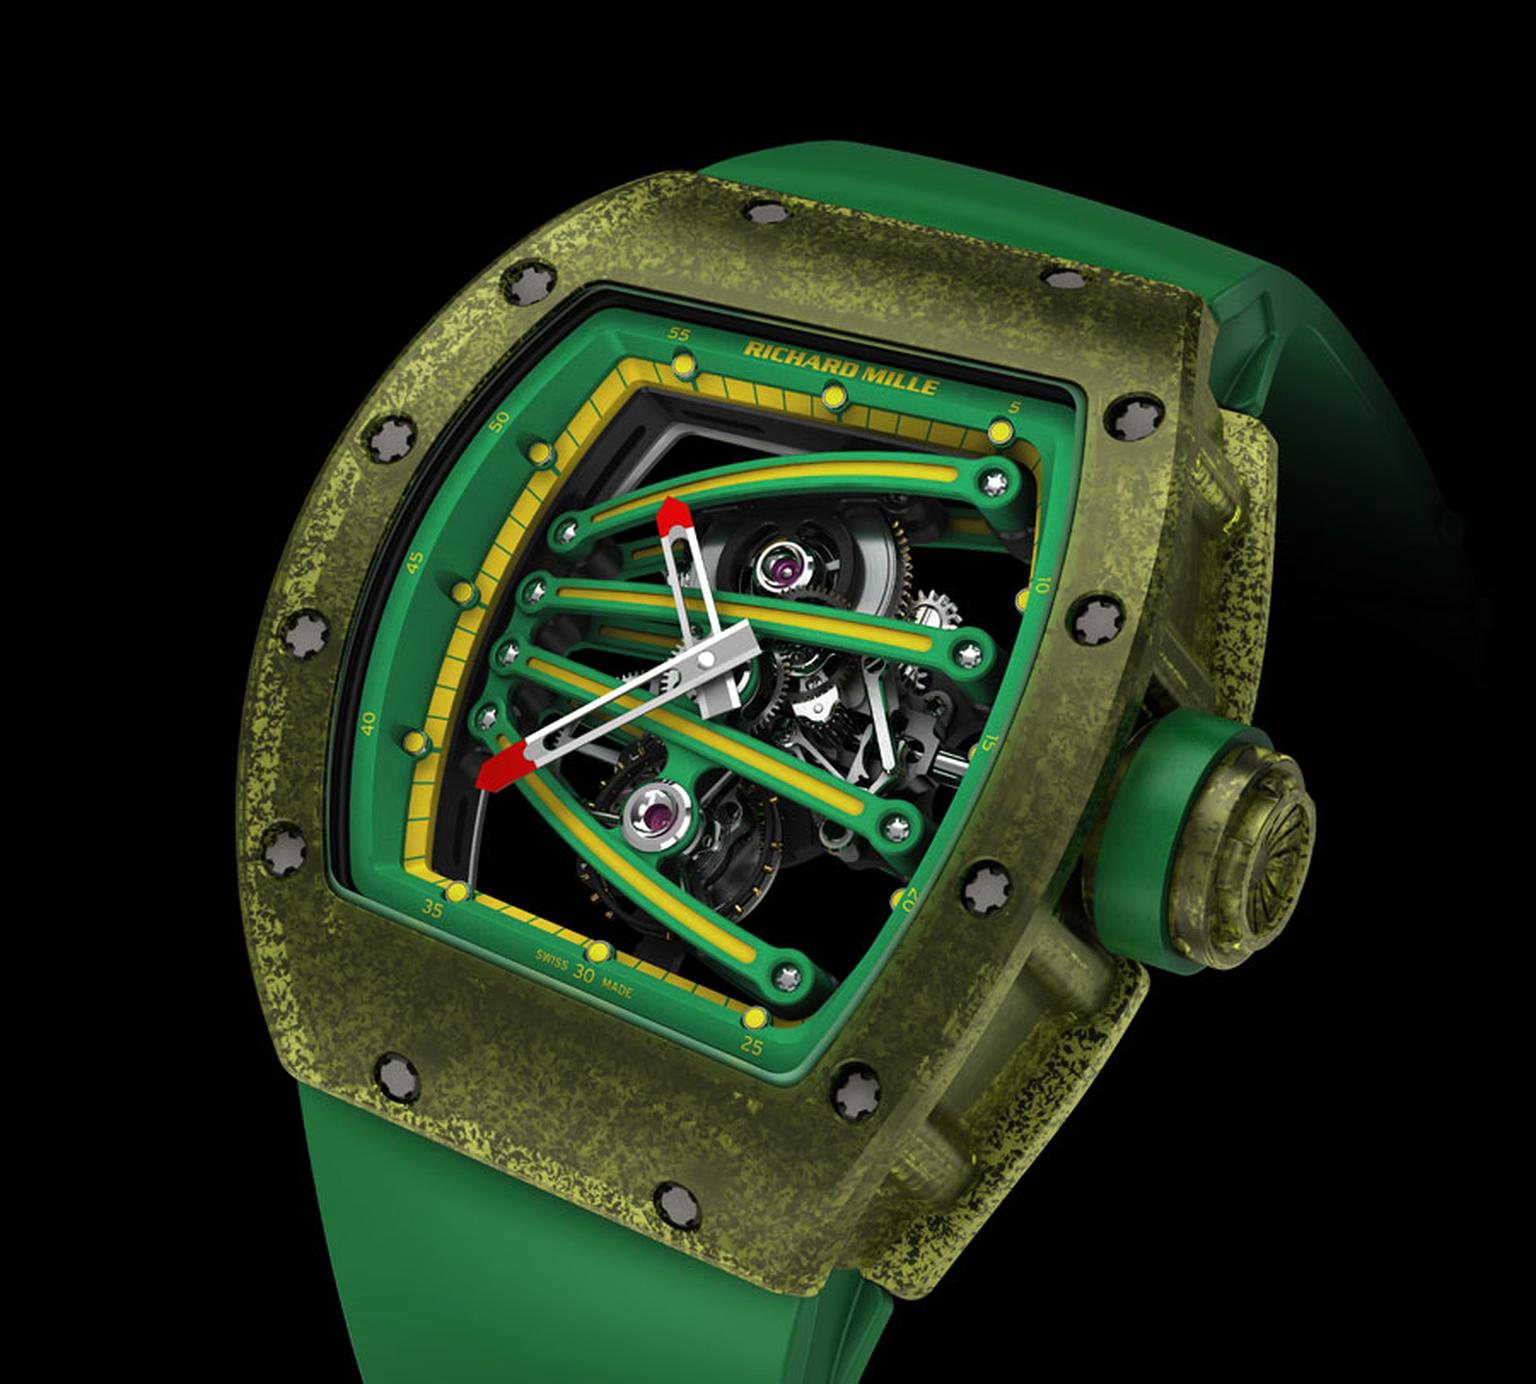 Richard-Mille-RM-59-01_FRONT